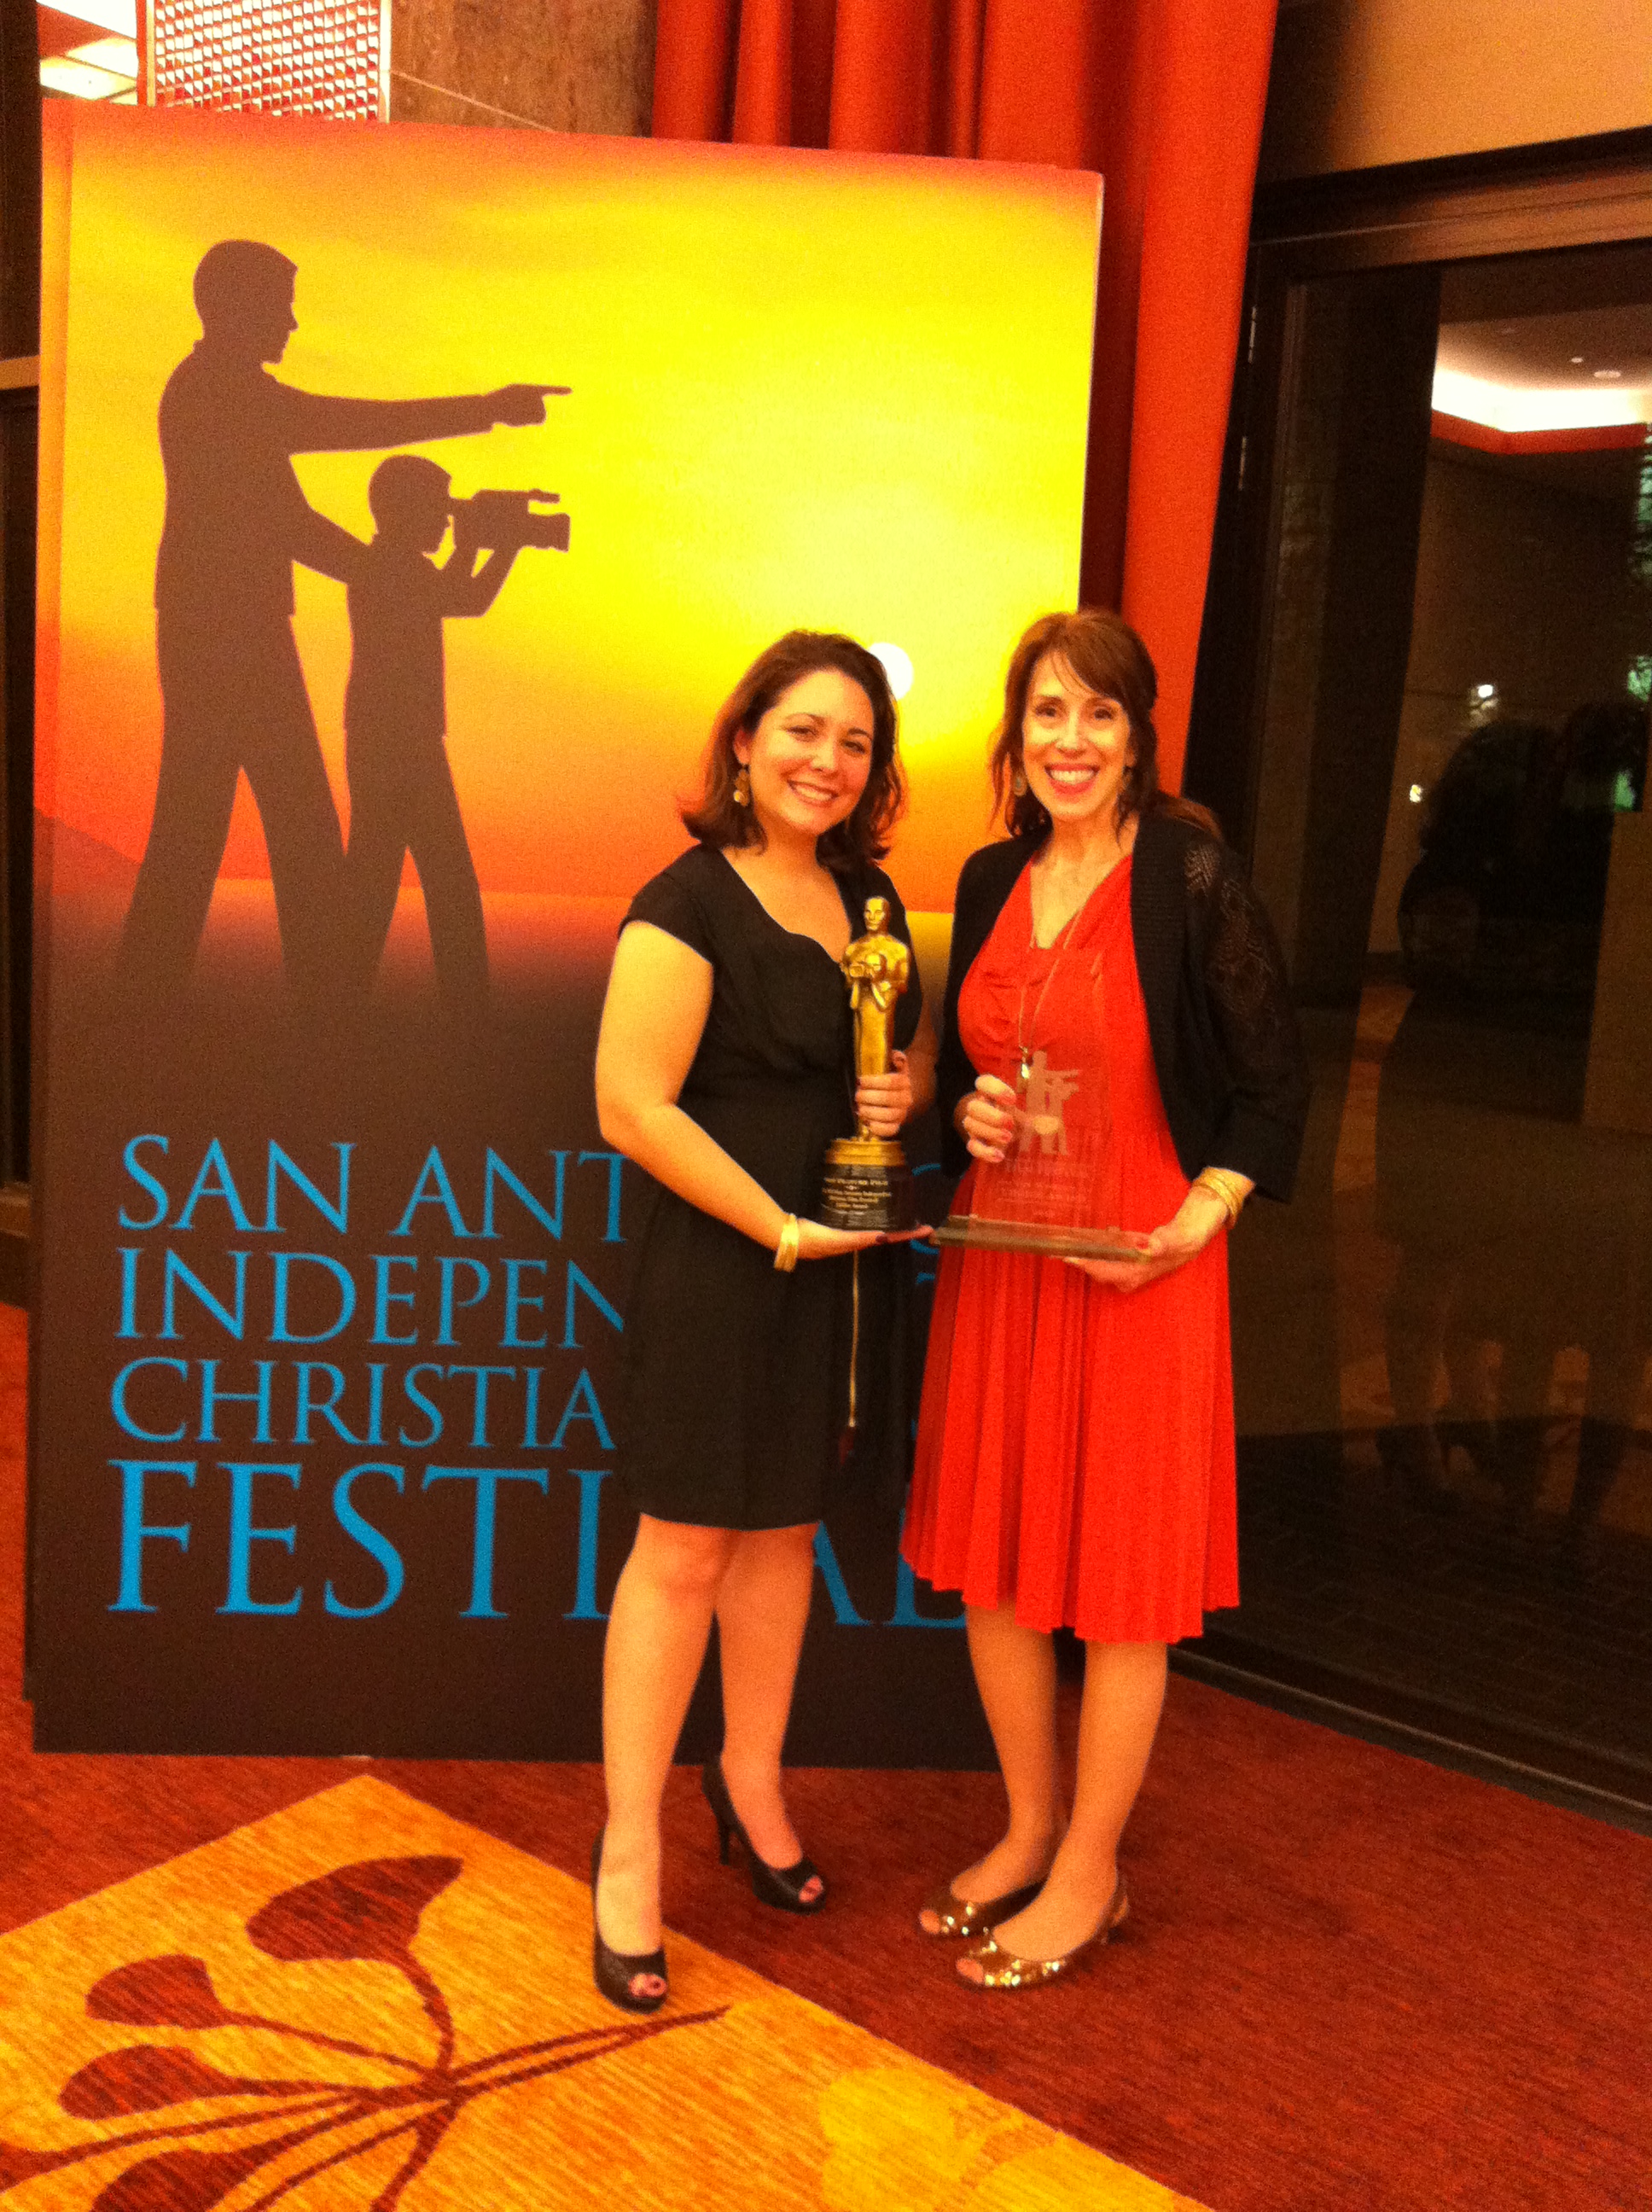 With Petra Spencer Pearce. Holding the awards for Best Feature Film and Audience Choice. San Antonio Independent Christian FF 2013